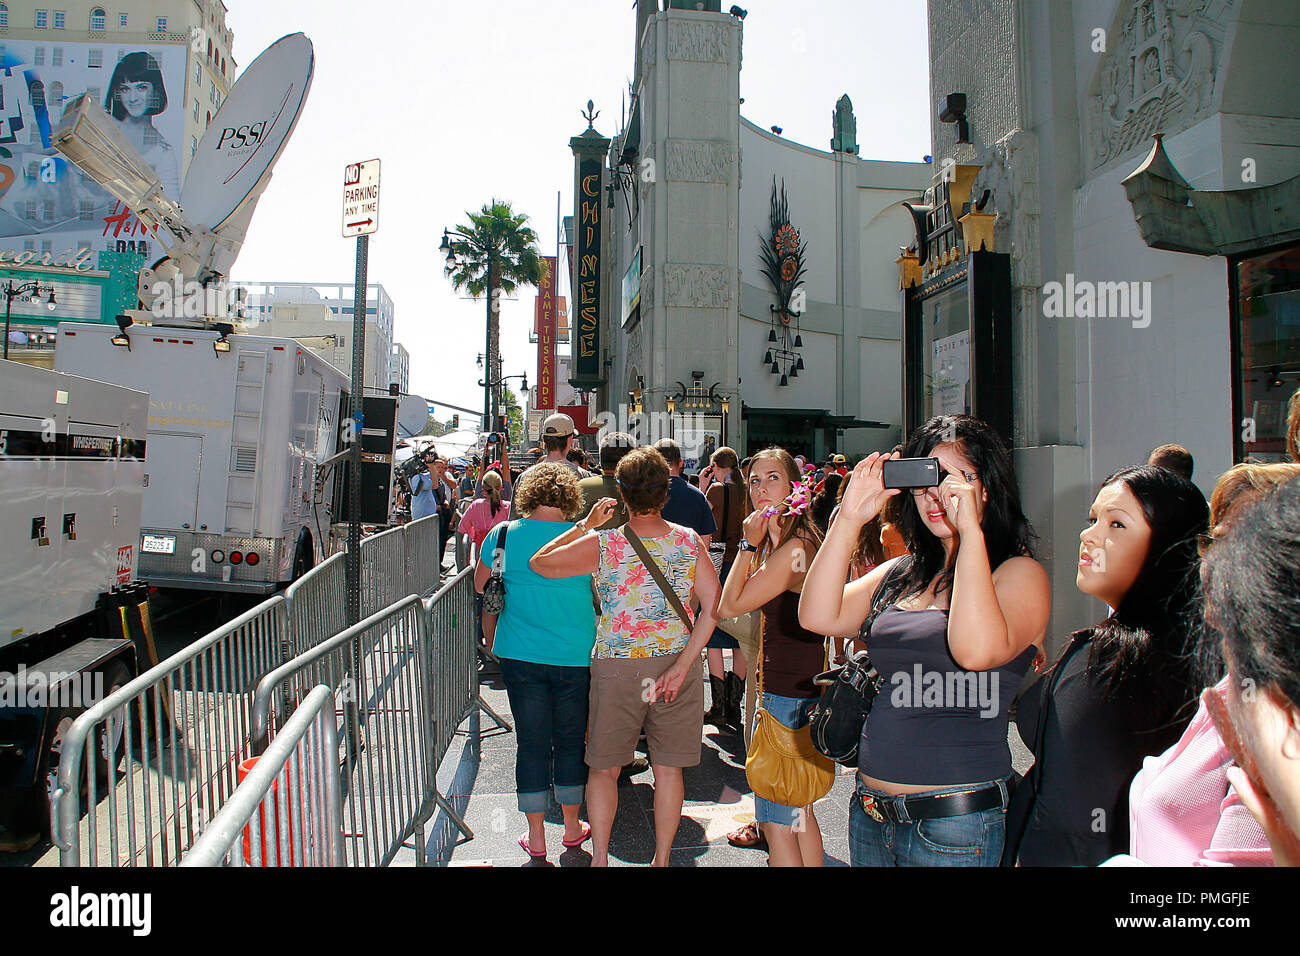 Media and fans converge on the Hollywood walk of fame to pay their respects to Michael Jackson at the make-shift shrine created on top of his Star in front of Grauman's Chinese Theatre in Hollywood, CA, June 27, 2009.  © Joseph Martinez / Picturelux - All Rights Reserved  File Reference # 30035 016PLX   For Editorial Use Only -  All Rights Reserved Stock Photo